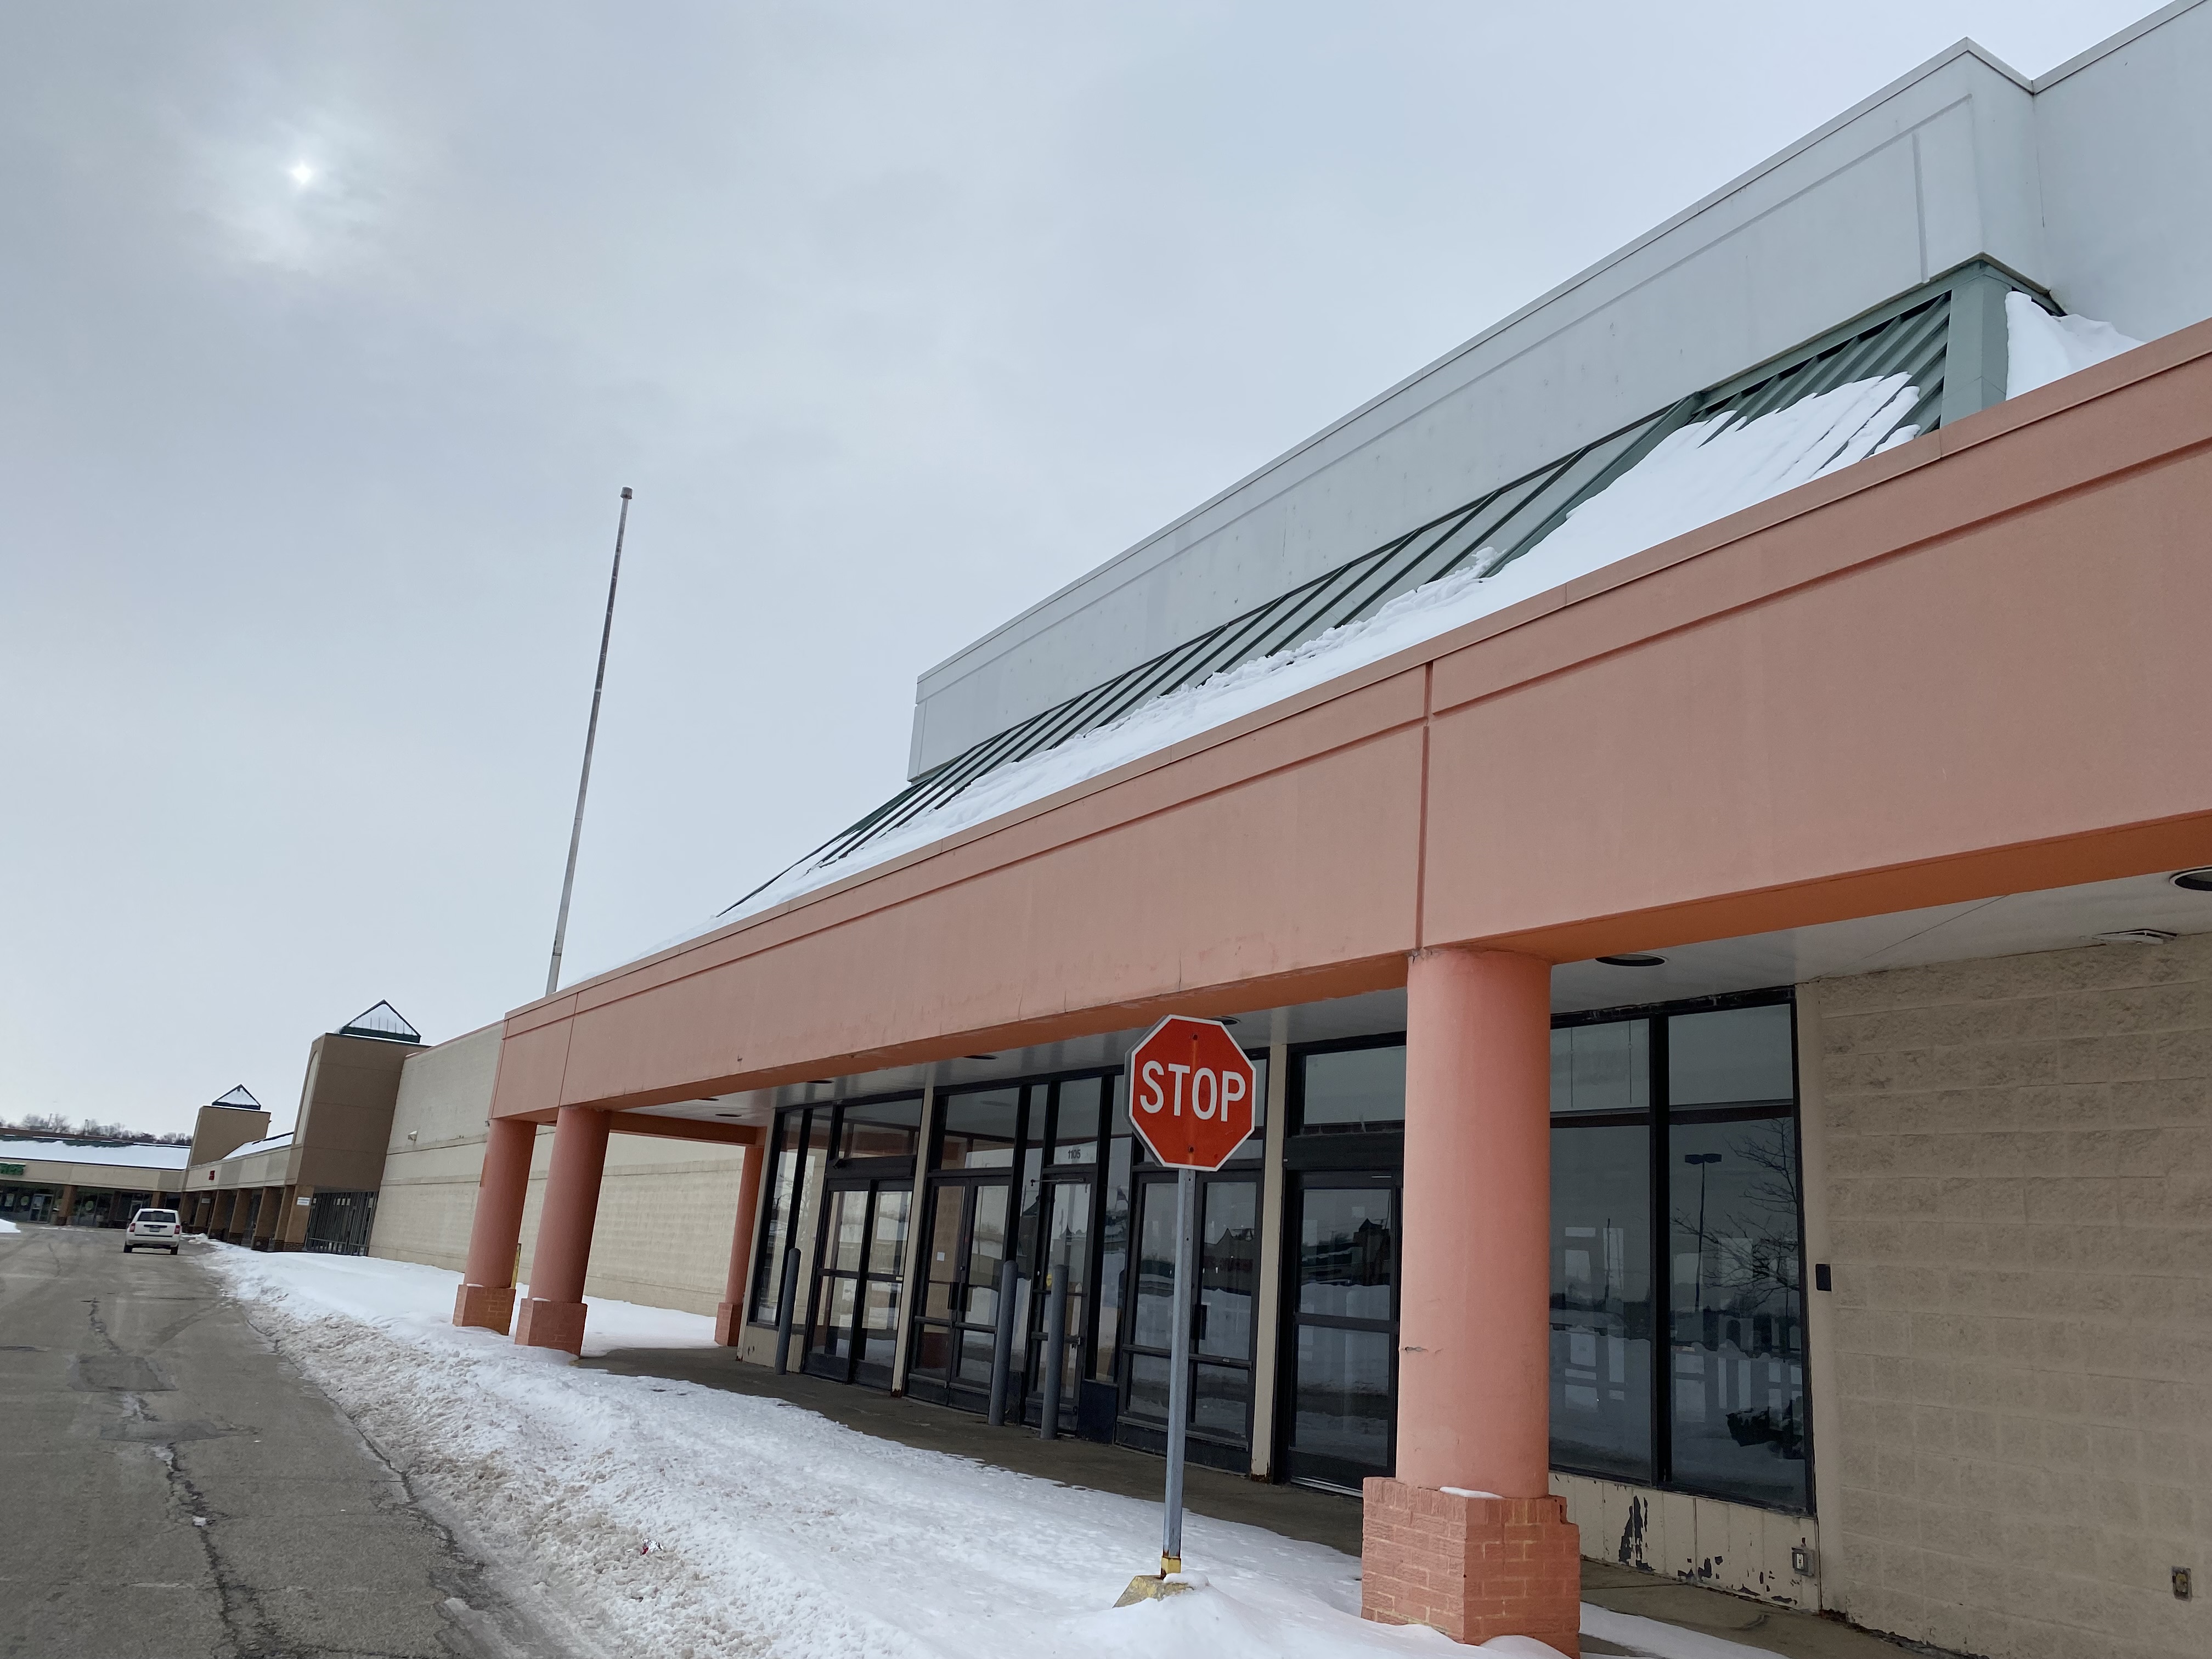 America's first Super Kmart may be demolished to make way for